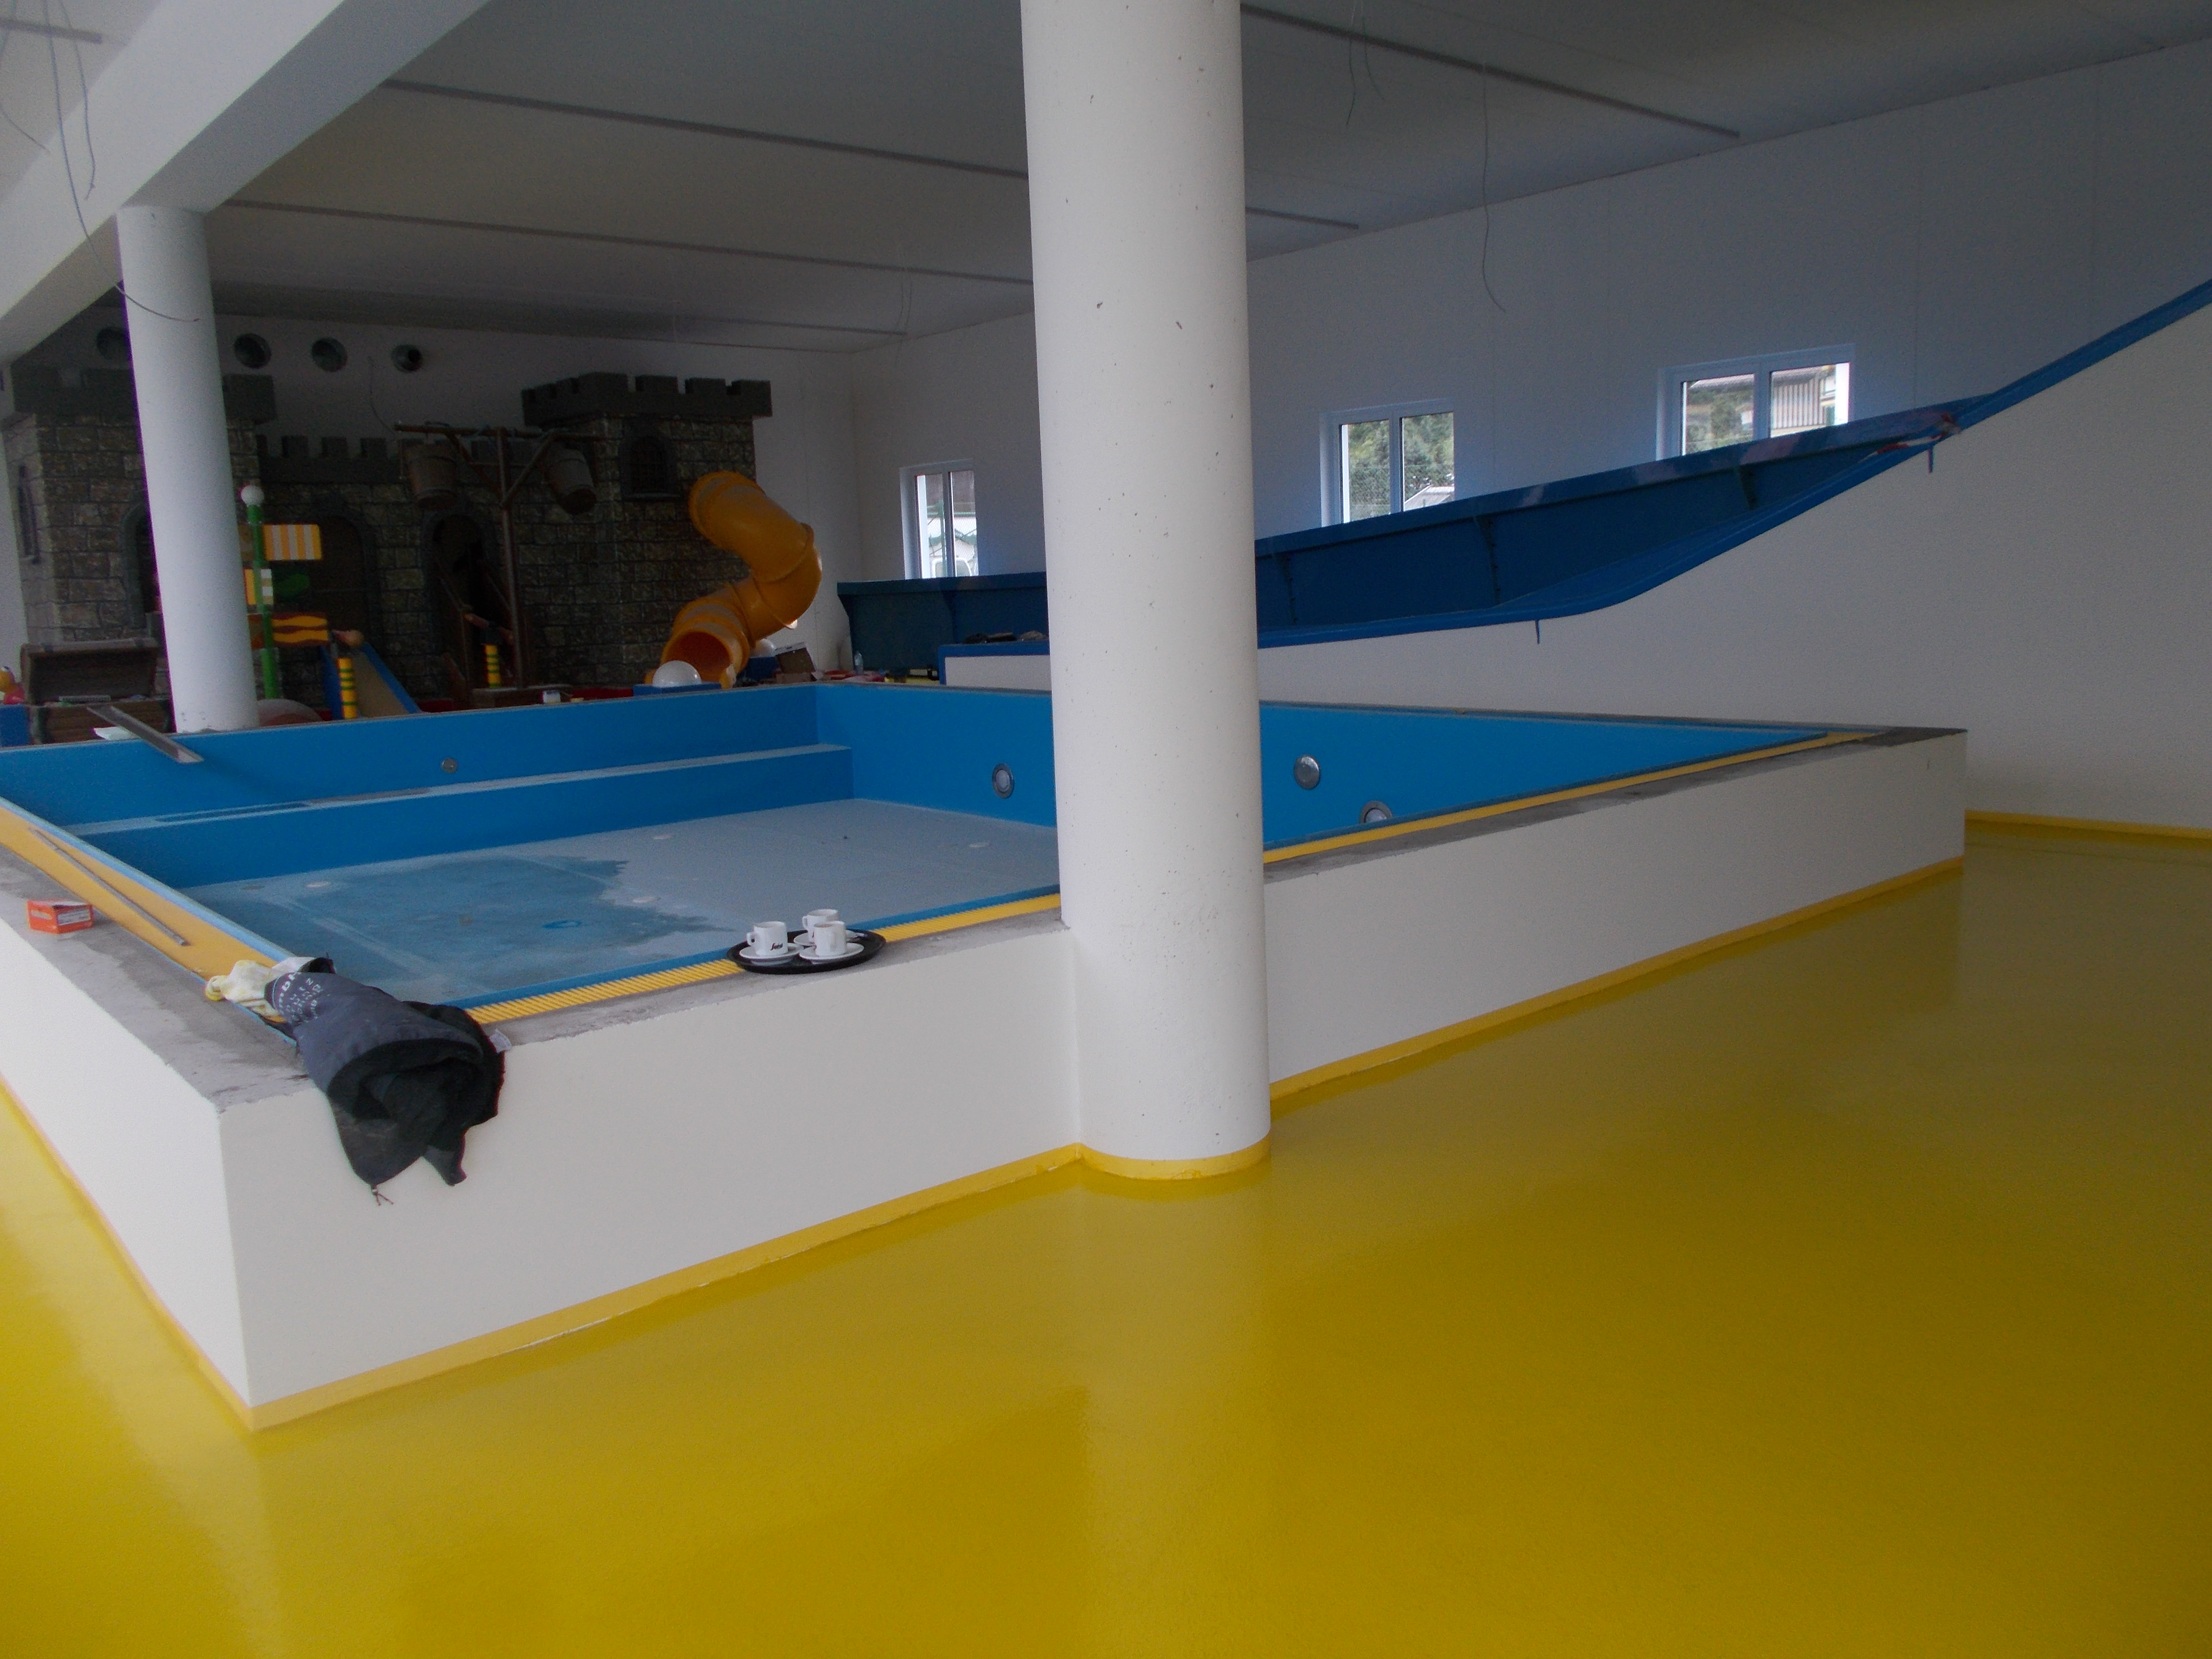 06 swimming pool and floor coated yellow and blue